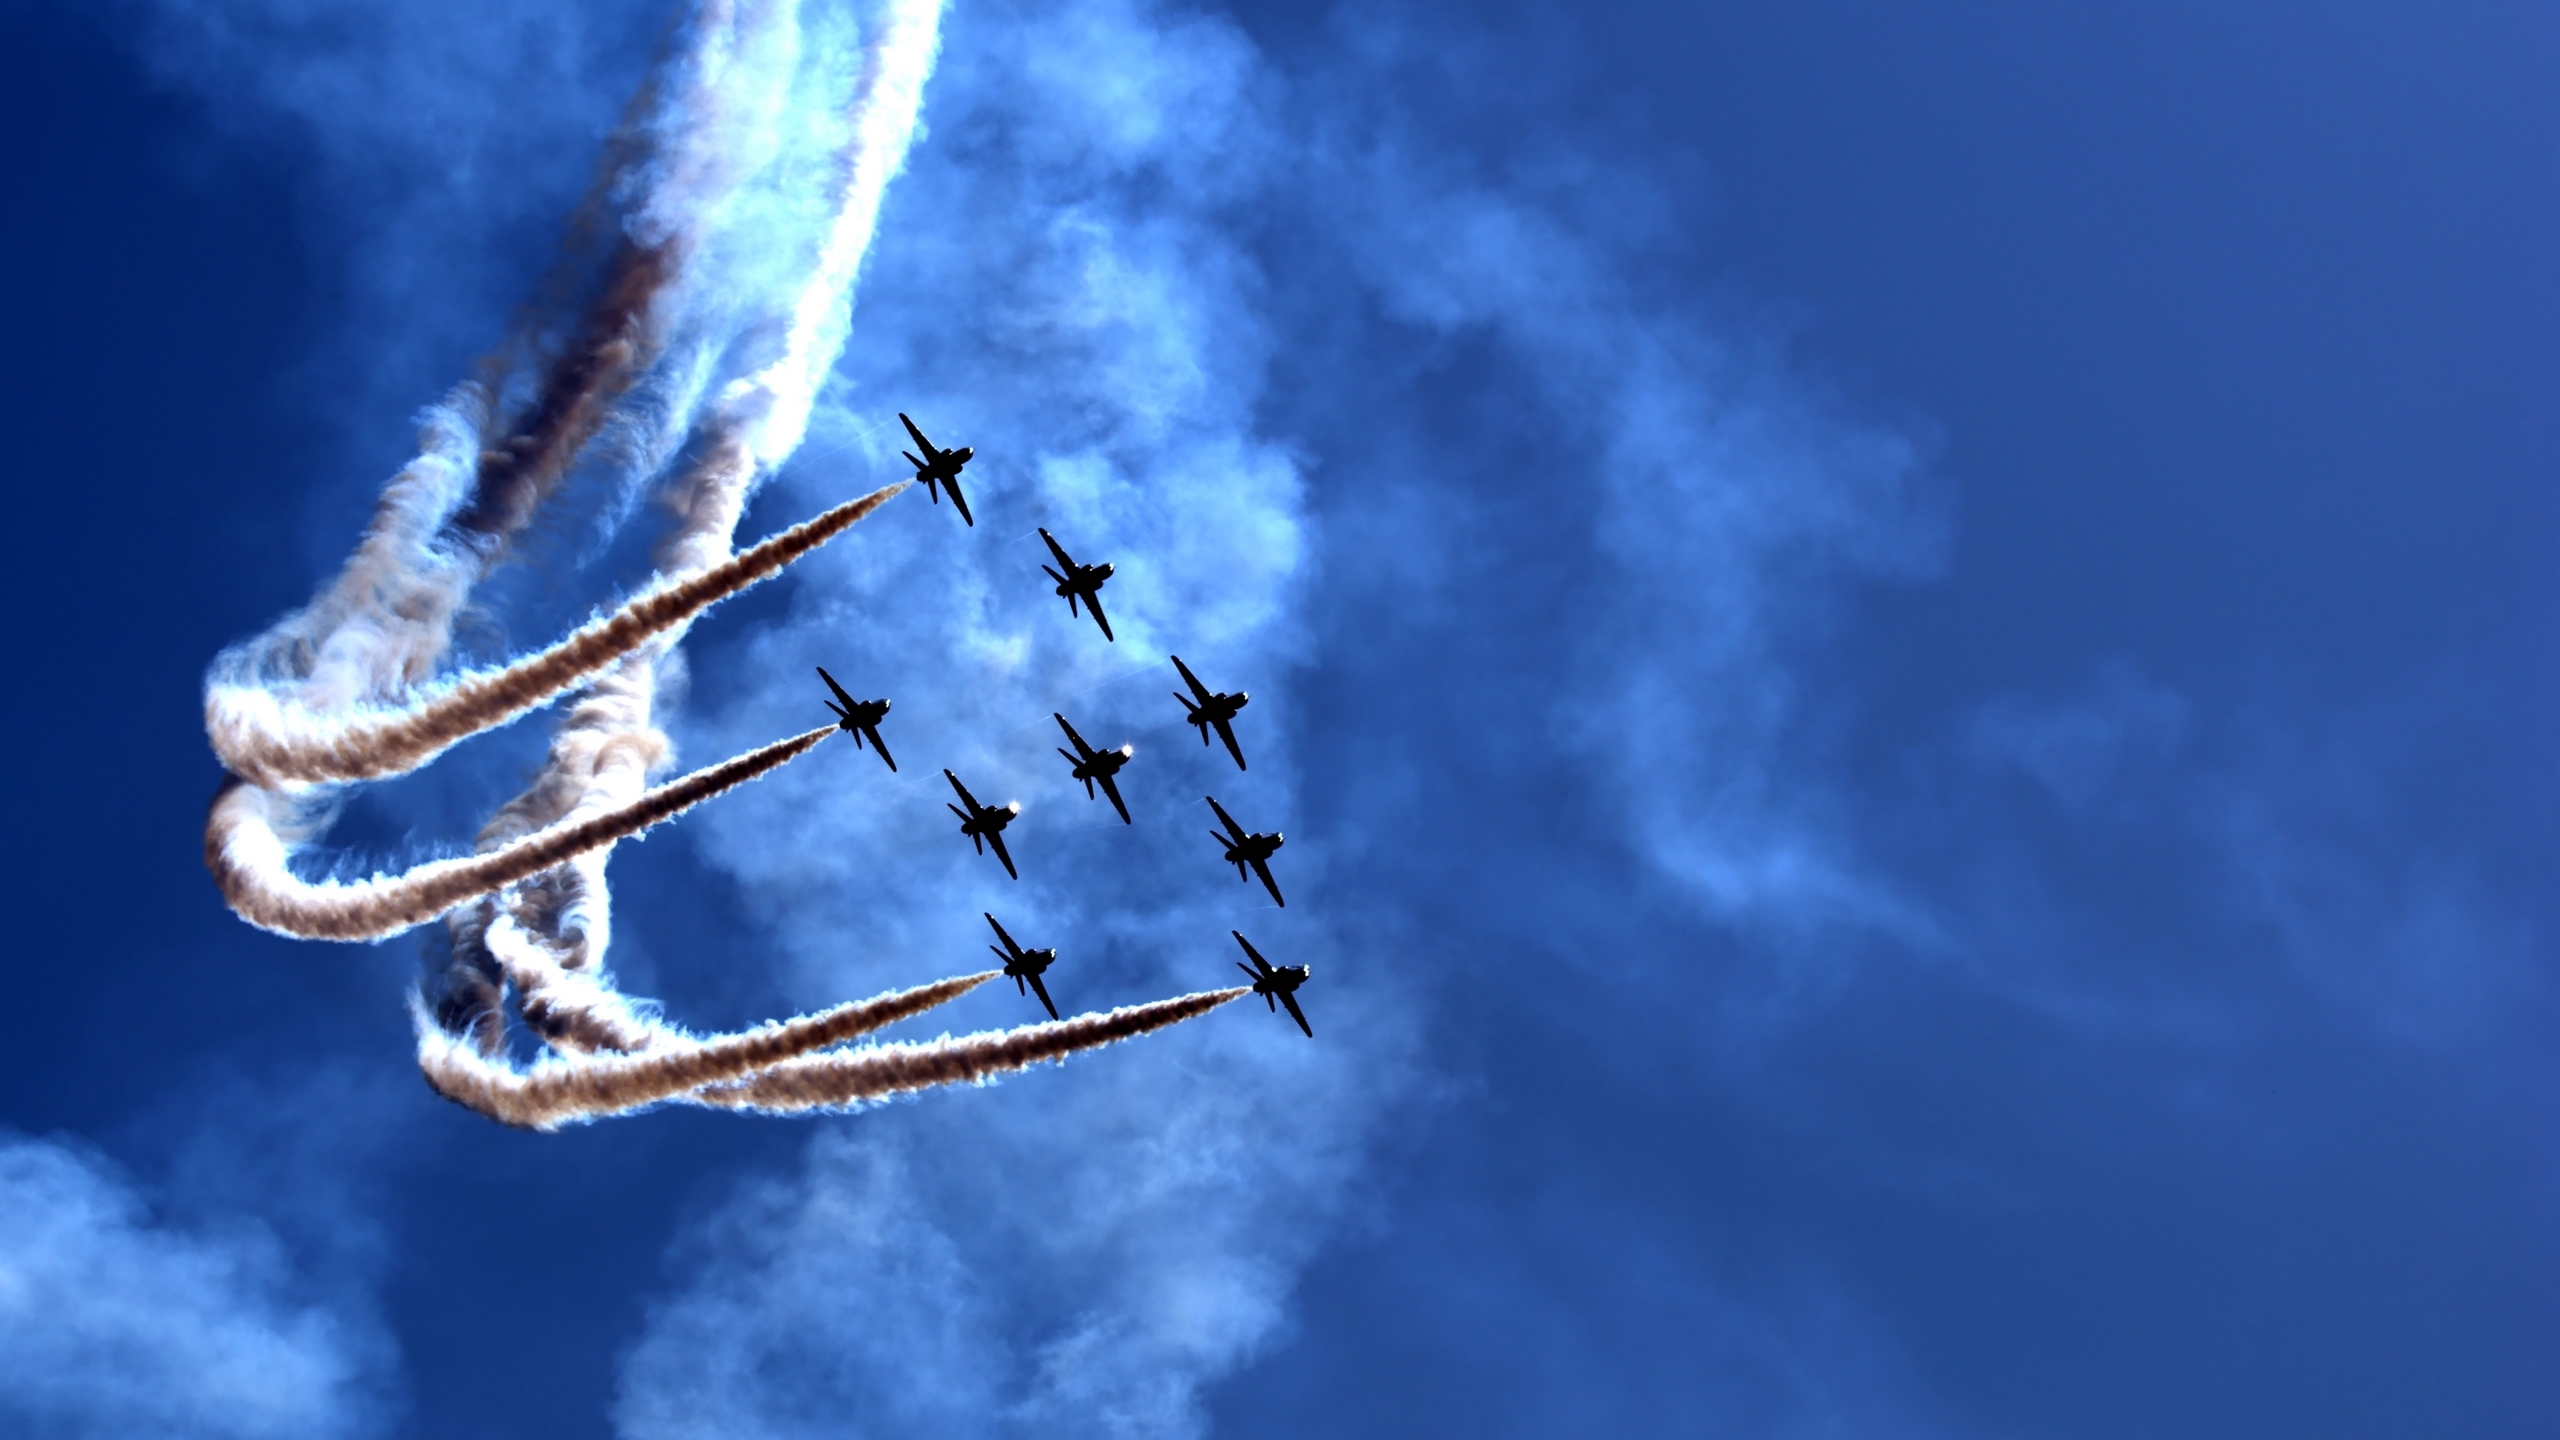 Image: Planes, stunt, dive, holiday, parade, air show, sky